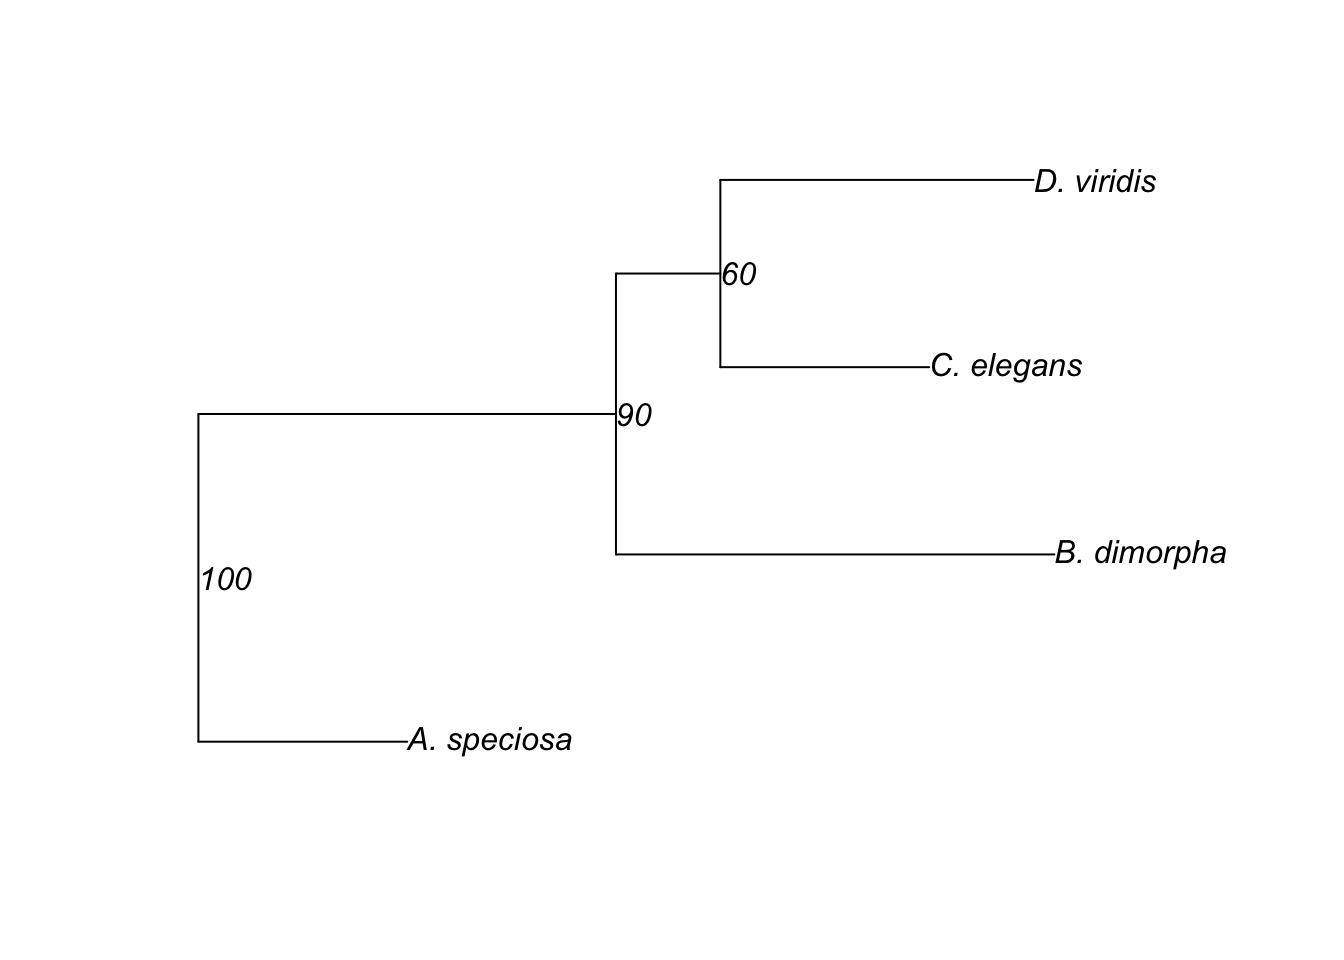 Rooted tree showing relationsip between 4 species with branch lengths and node supports.